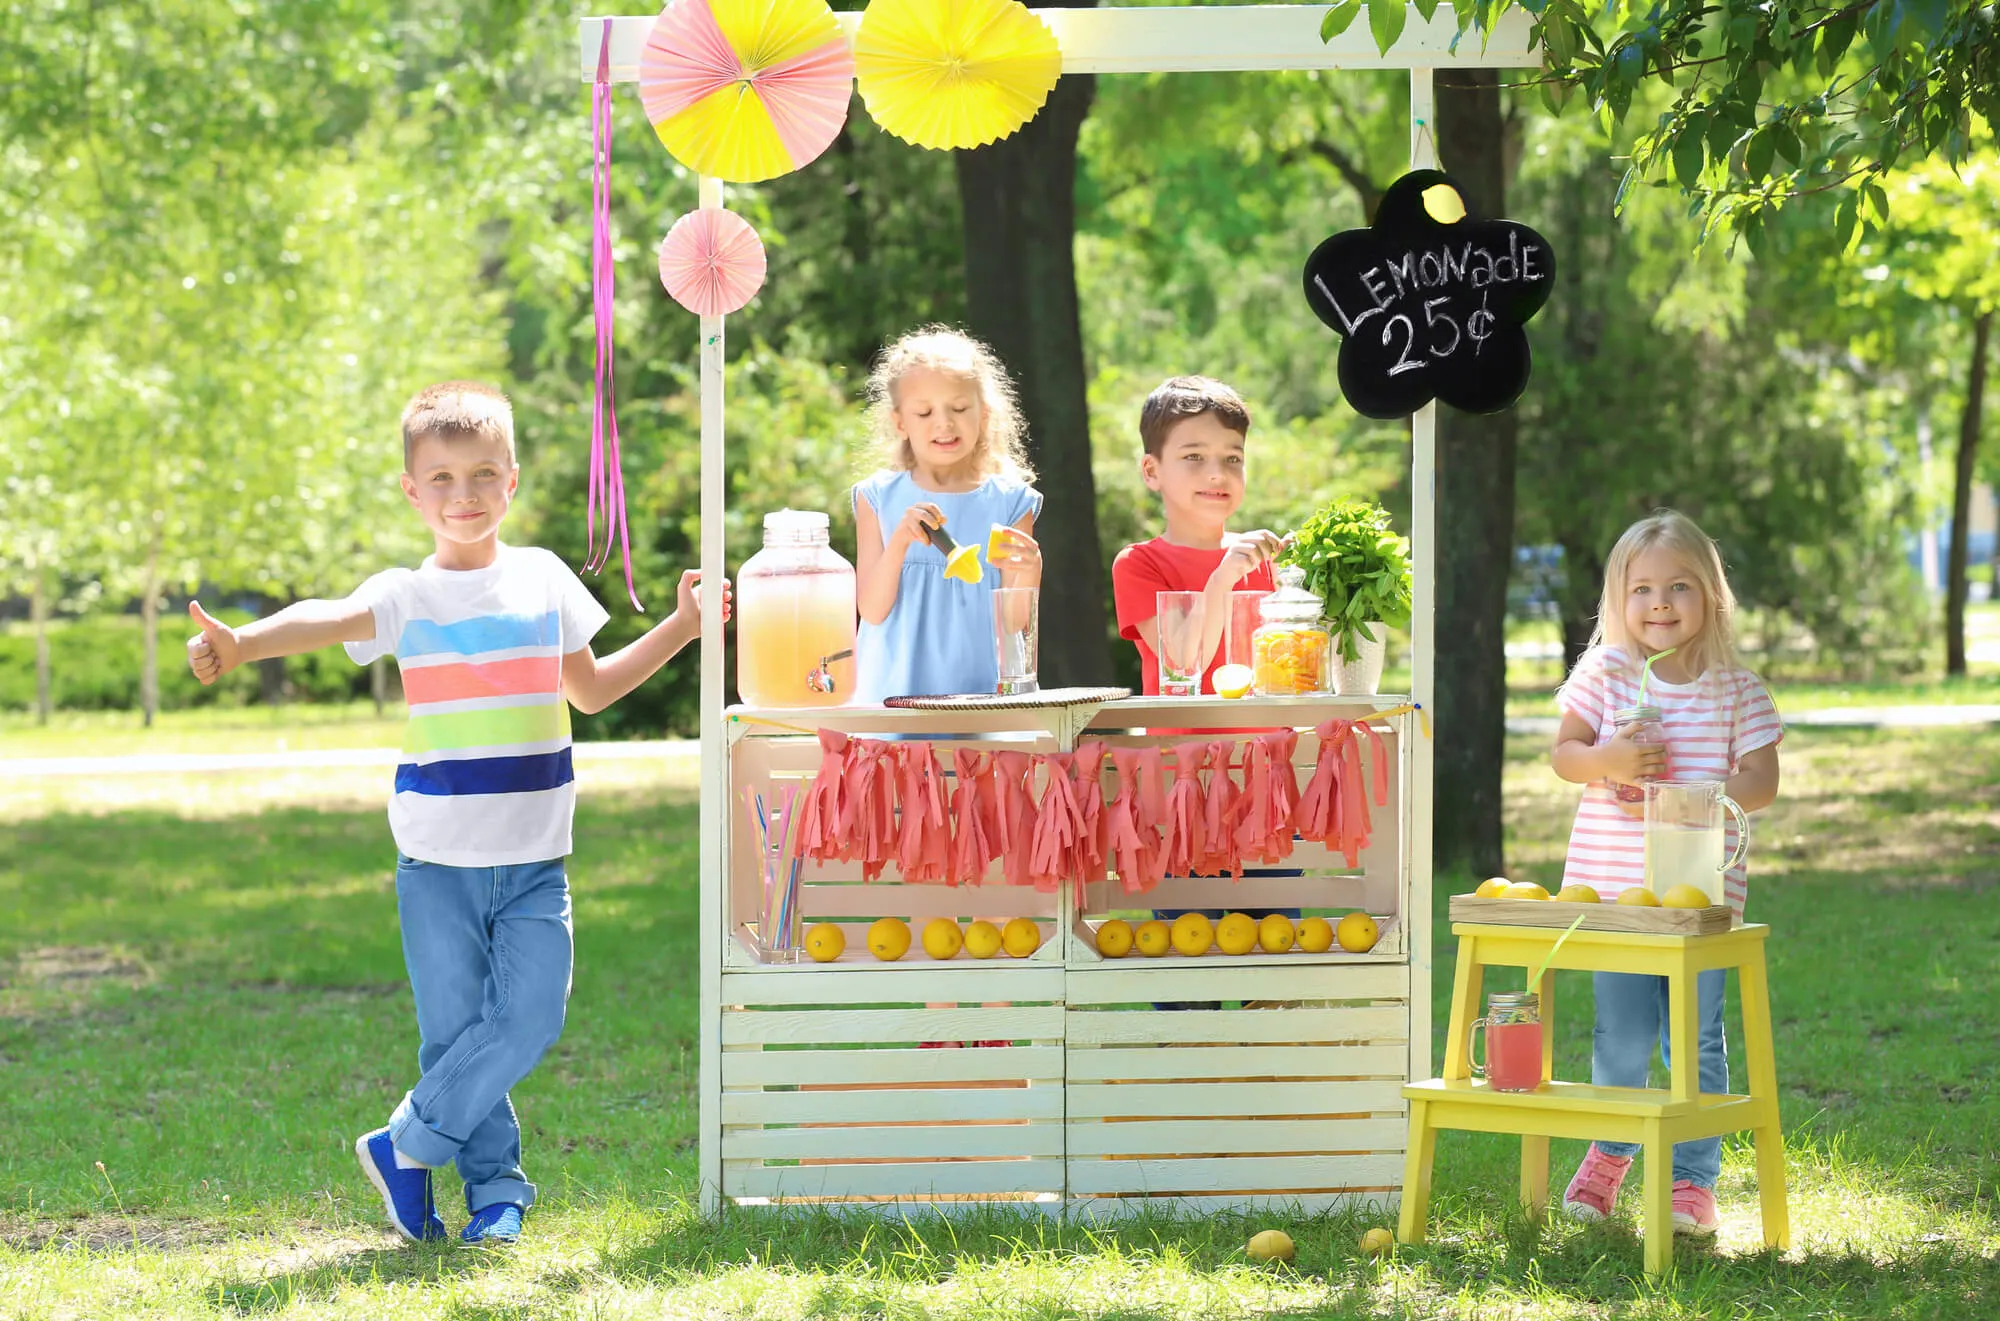 4 kids with a lemonade stand outdoors selling for 25 cents